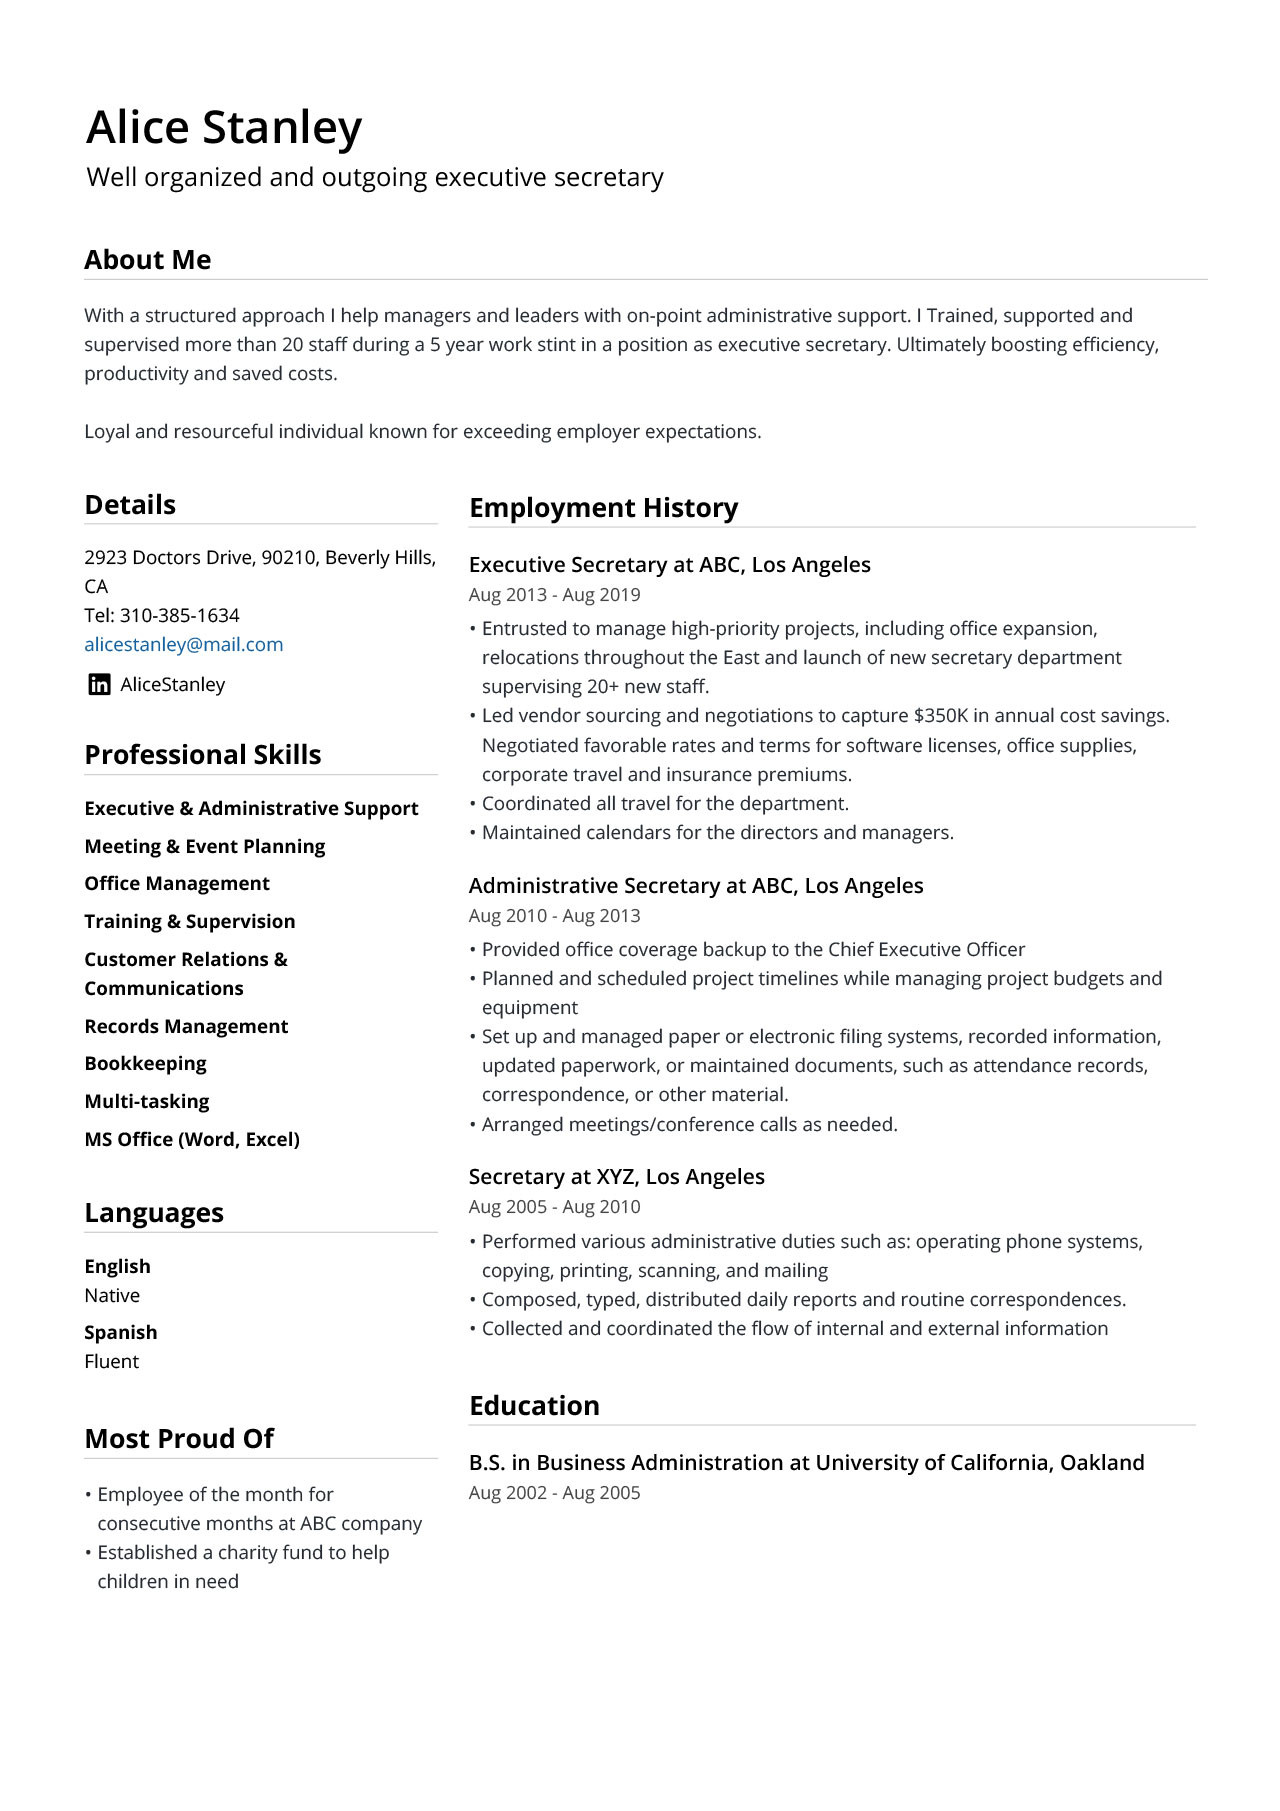 Sample Resume Showing Mail Copy Fax Office Equipment Experience Secretary Resume Example & Guide [2022] – Jofibo